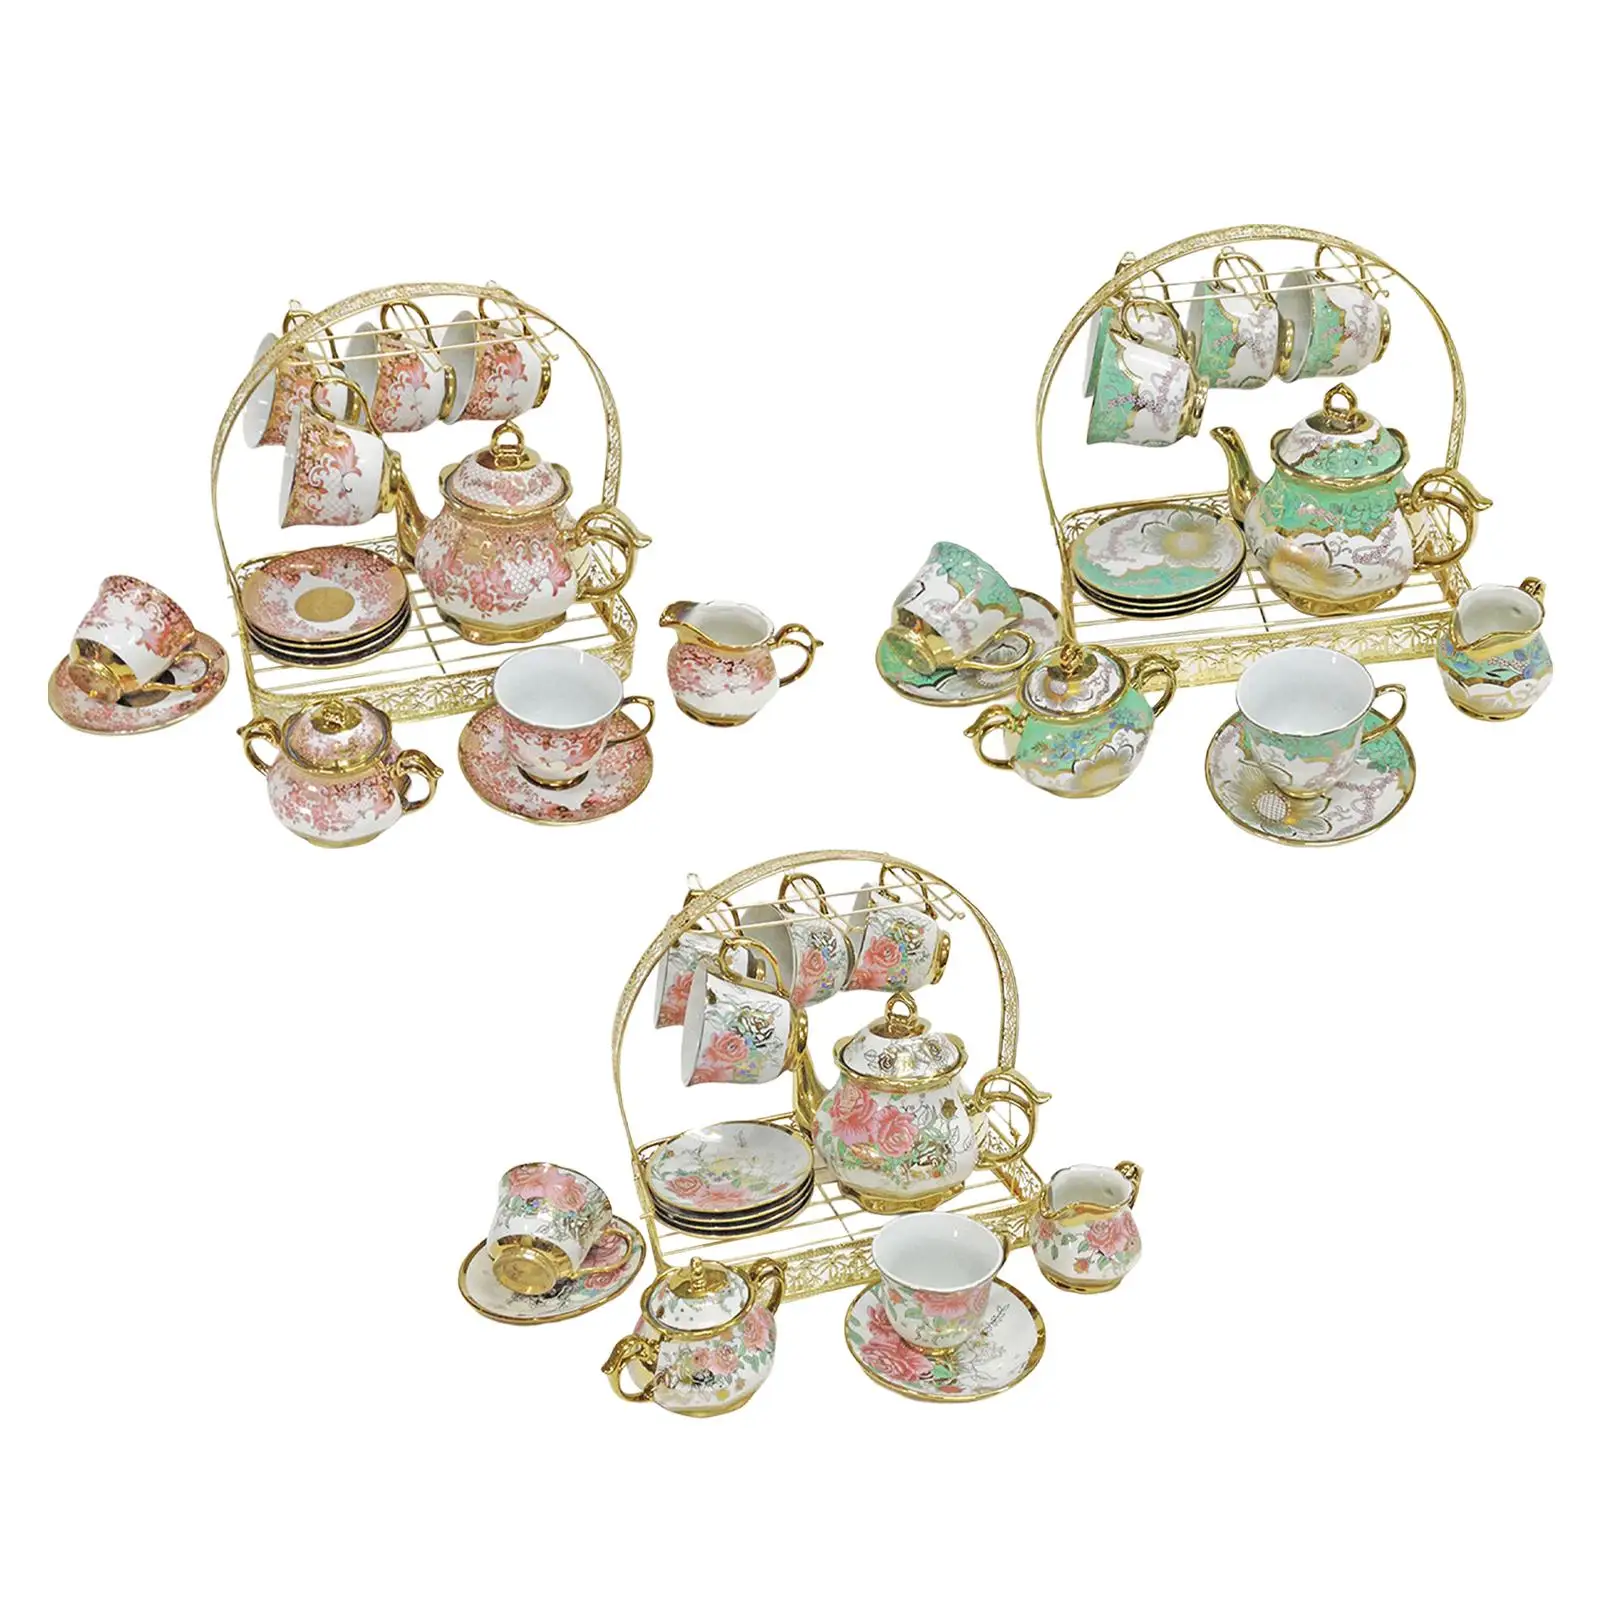 Ceramic Cups and Saucers Set Floral Tea Cups Nordic with Stand Porcelain Tea Cups Set for Home Dining Room Tea Party Living Room